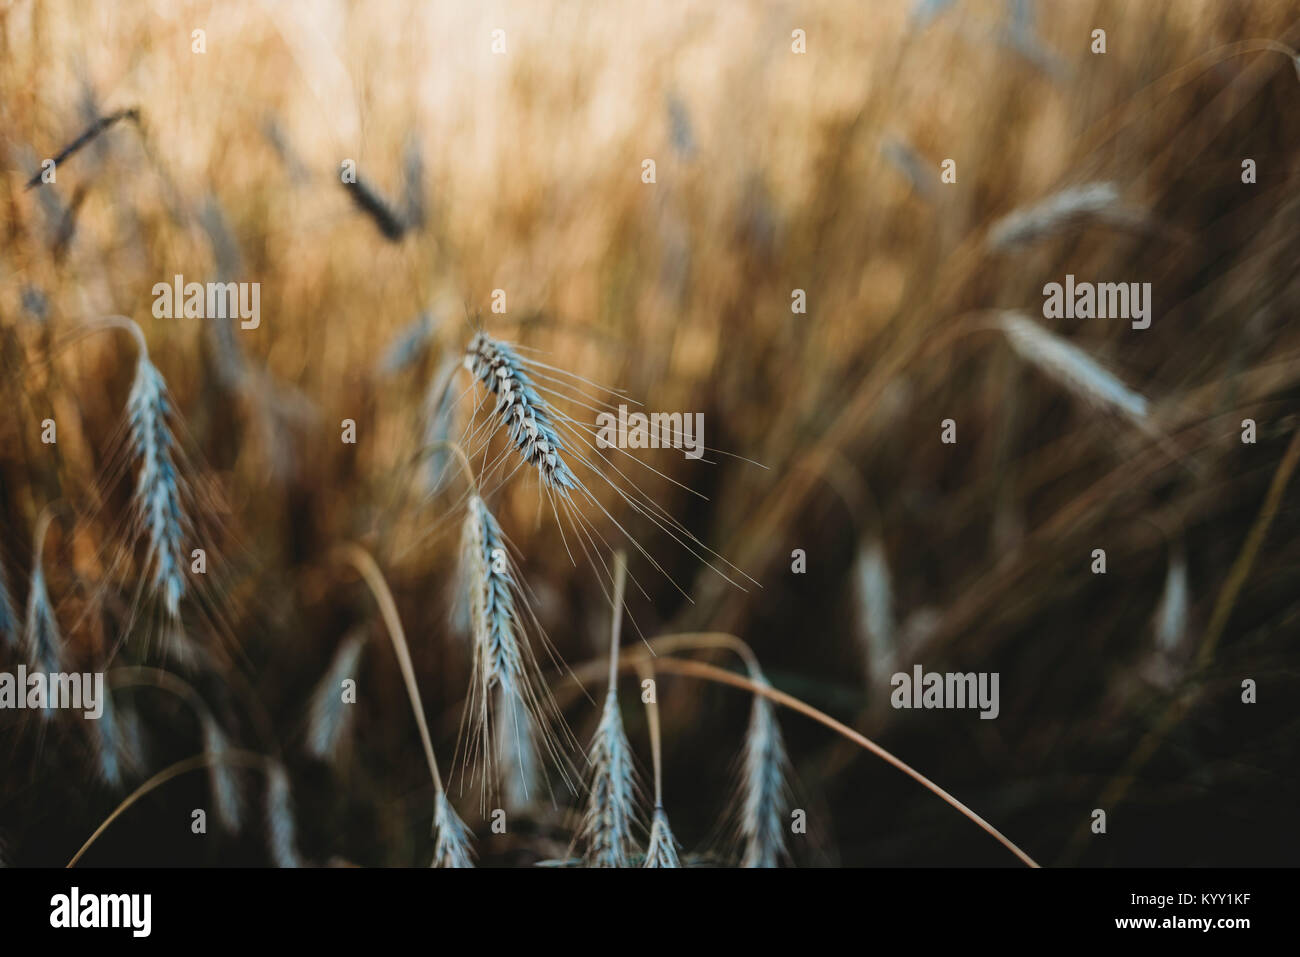 Close-up of wheat crops growing on field Stock Photo